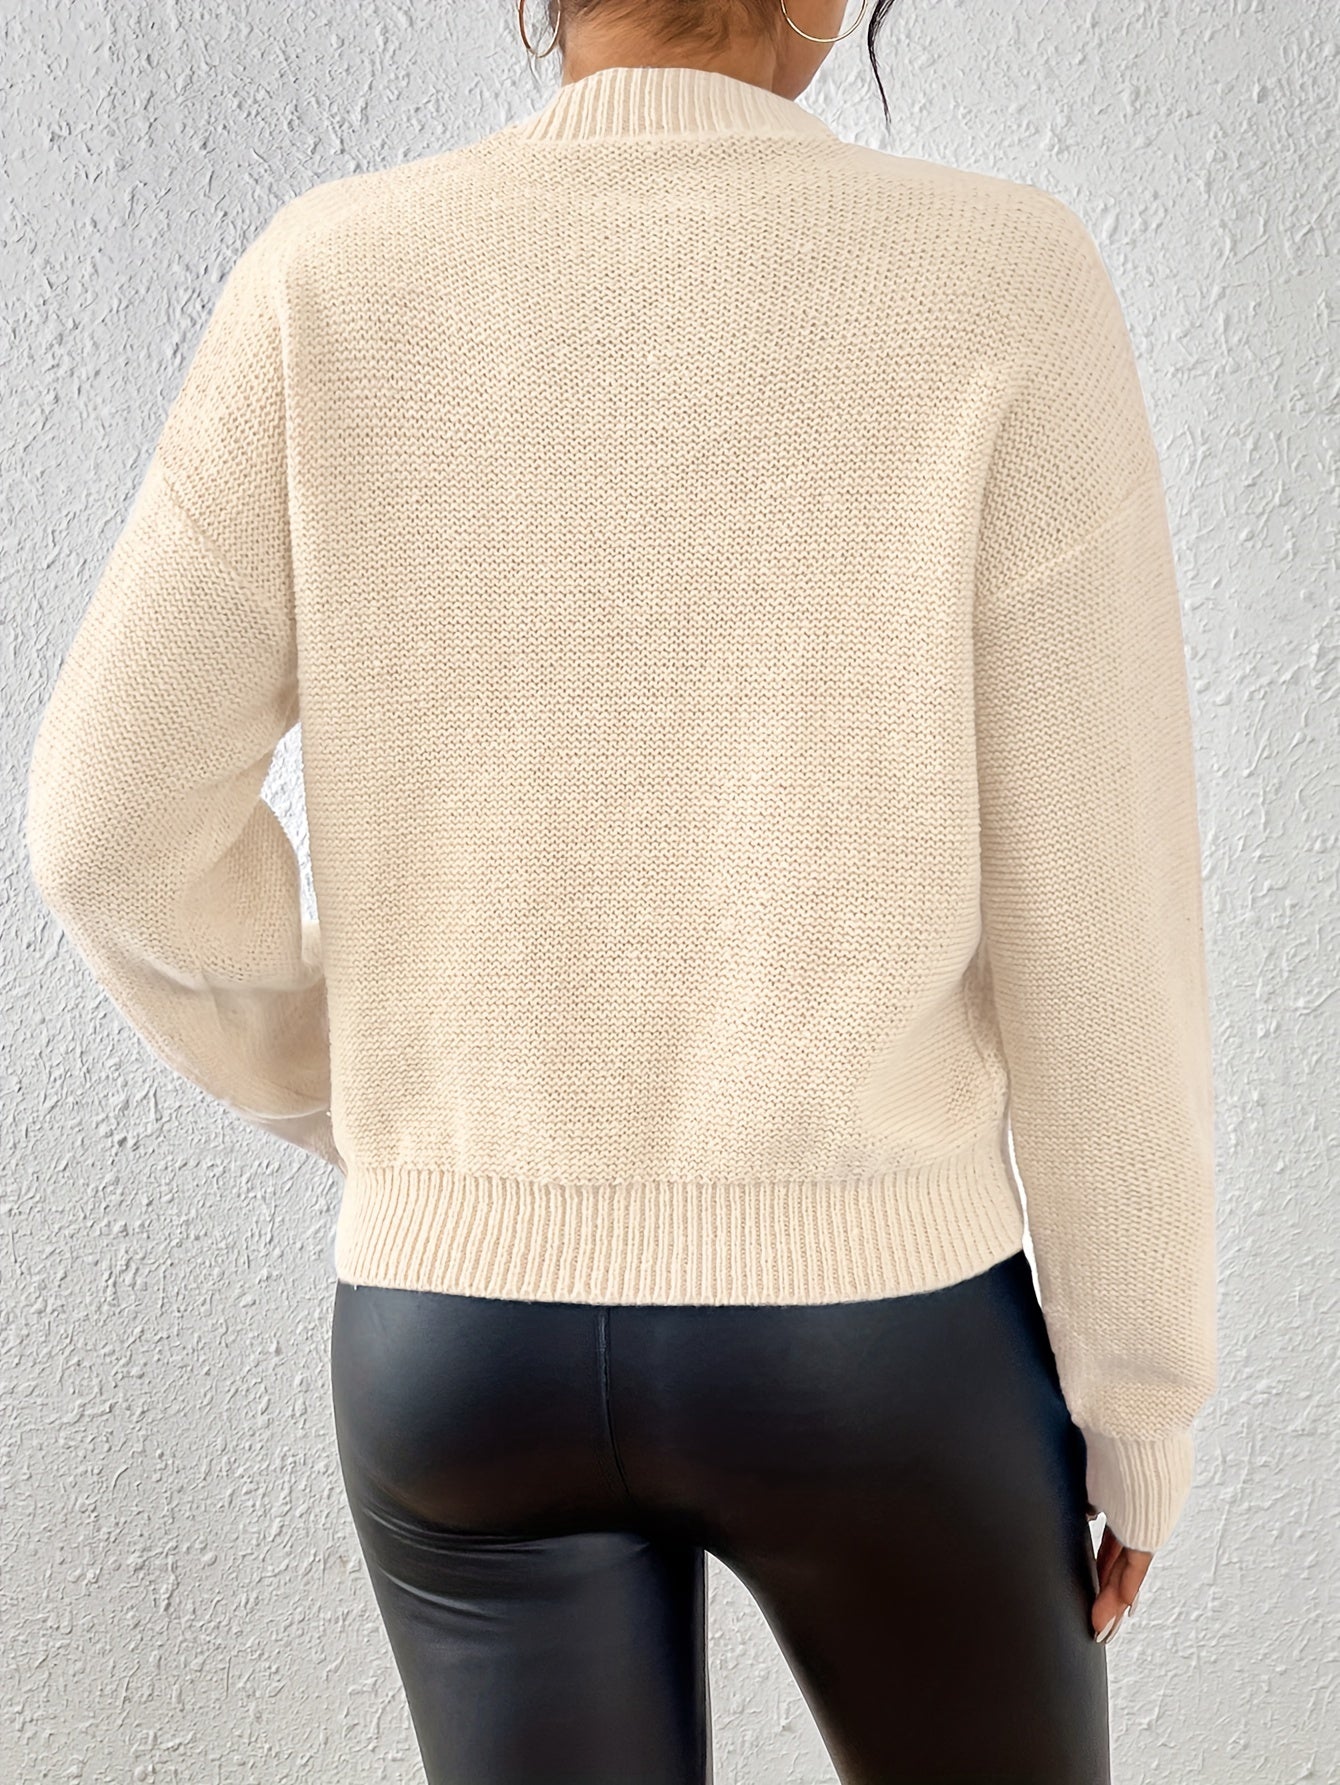 Solid Crew Neck Cable Knit Sweater, Casual Long Sleeve Sweater, Women's Clothing